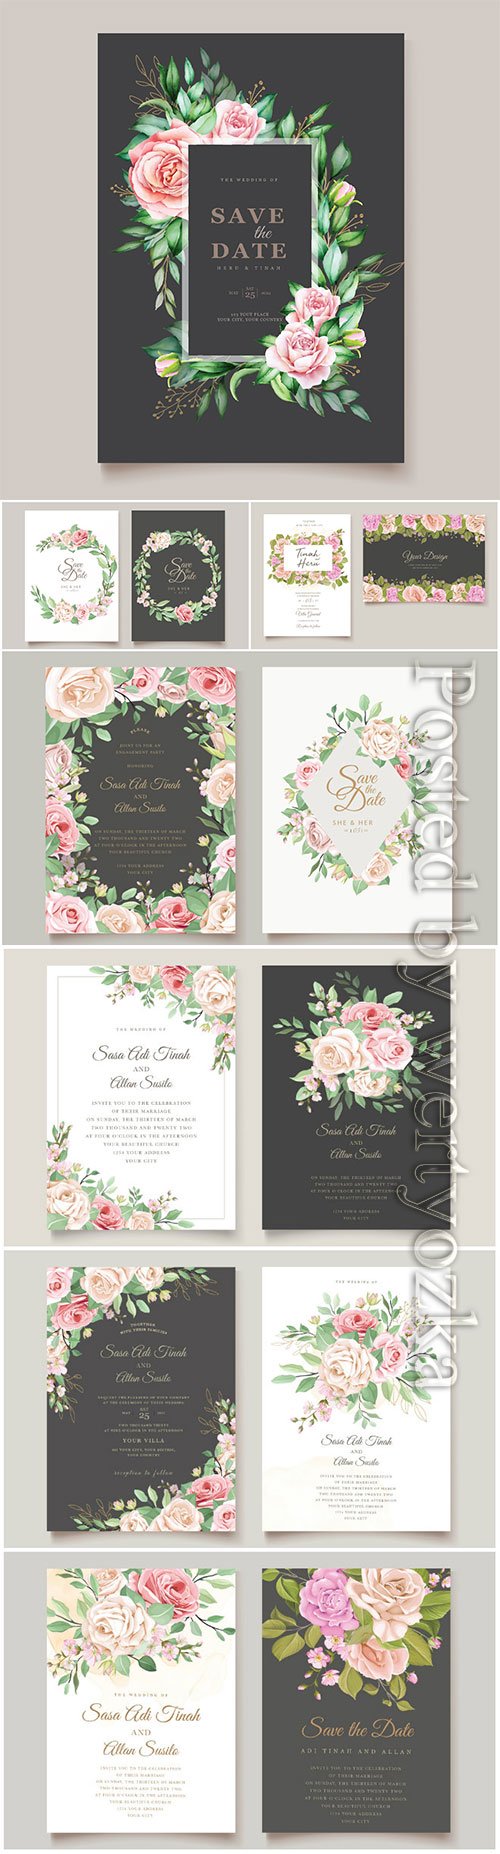 Wedding invitation vector card with floral and leaves